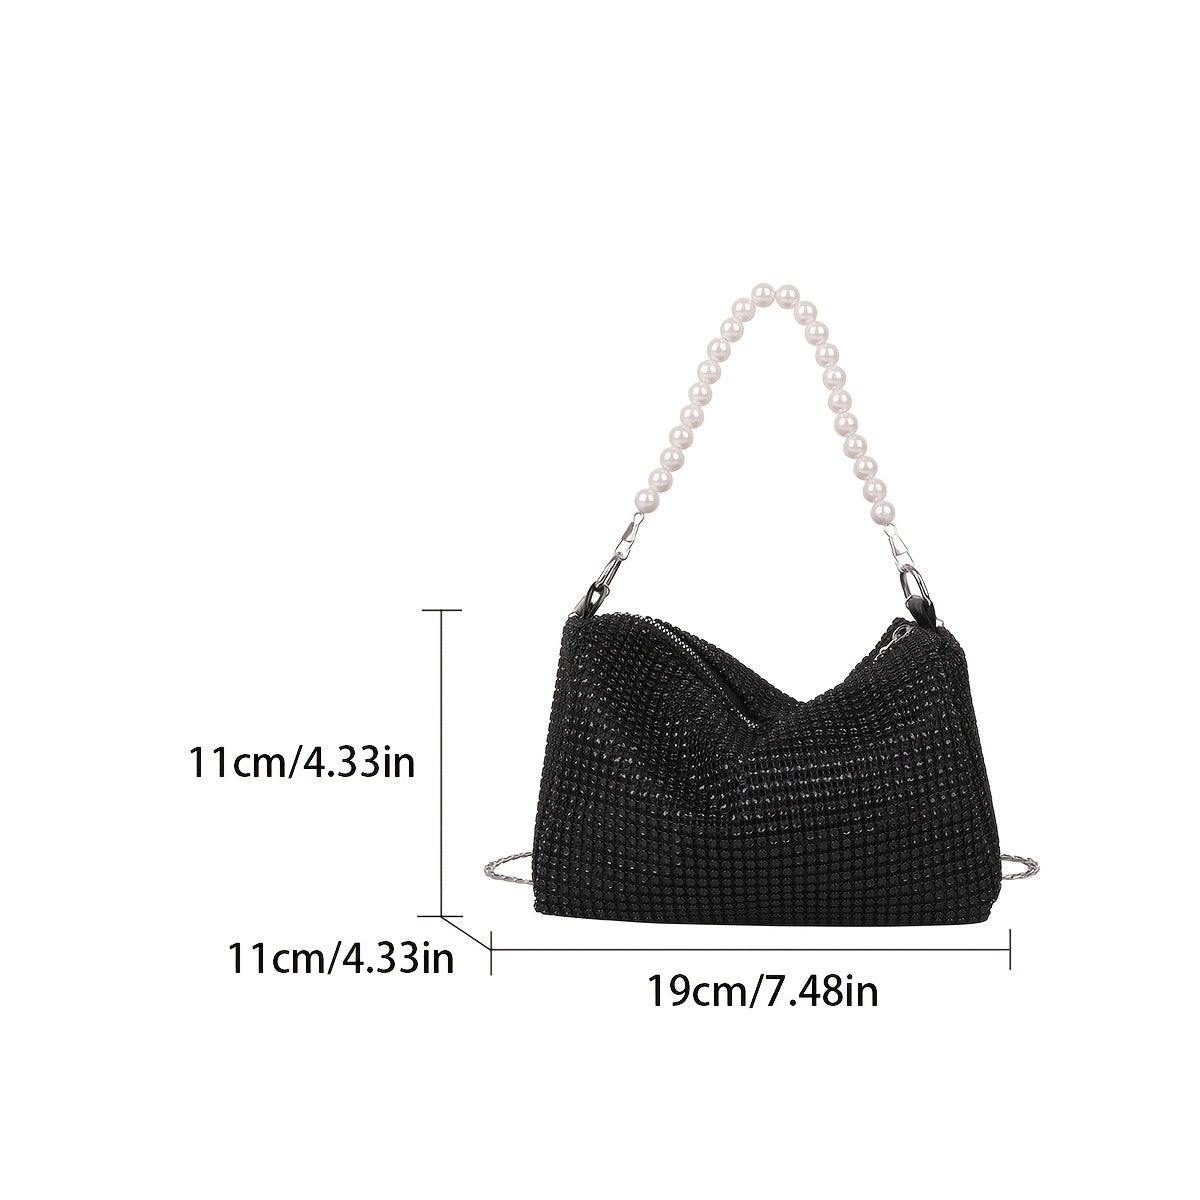 realaiot  Bling-Bling Rhinestone Shoulder Bag, Trendy Chain Clutch Purse, Shiny Chain Crossbody Bag For Evening Party Prom Wedding